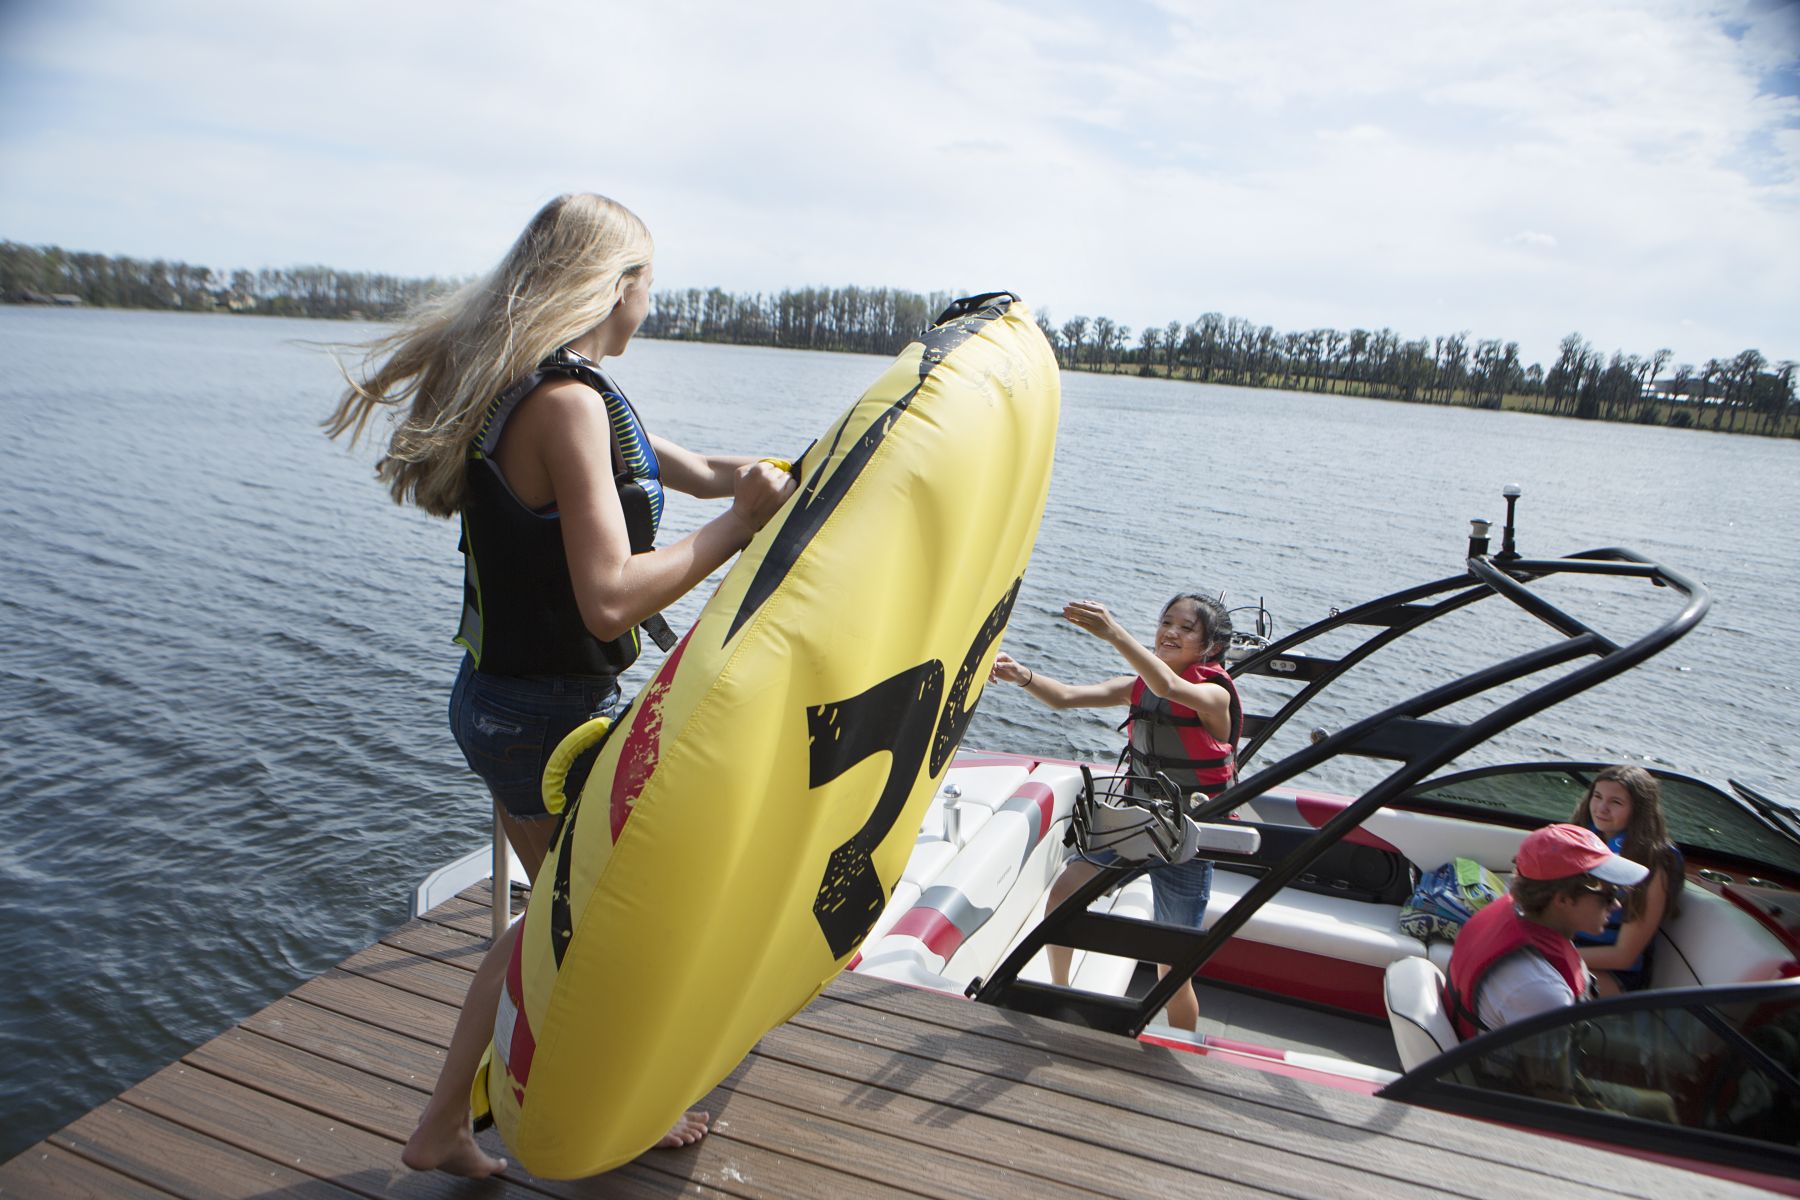 Kids loading the boat for a fun afternoon on the water in properly fitting life jackets.